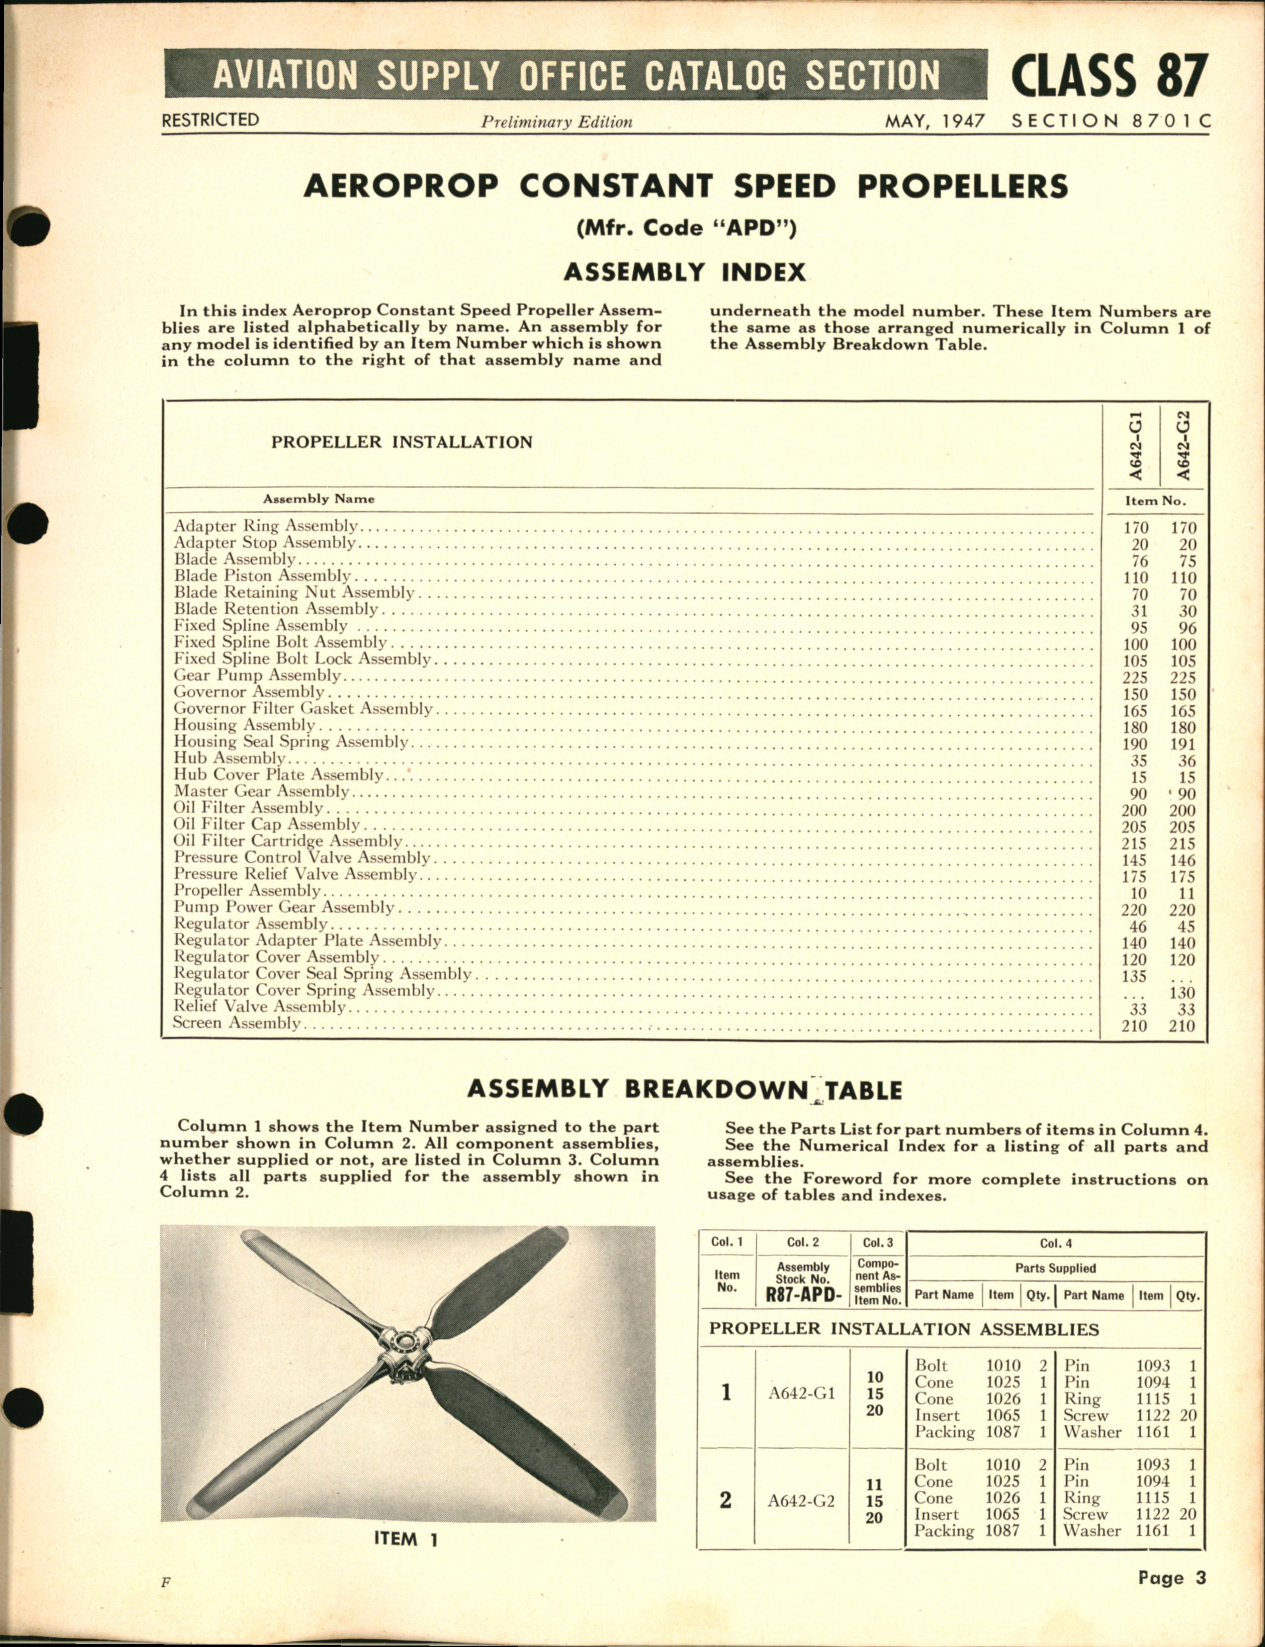 Sample page 3 from AirCorps Library document: Aeroprop Constant Speed Propellers